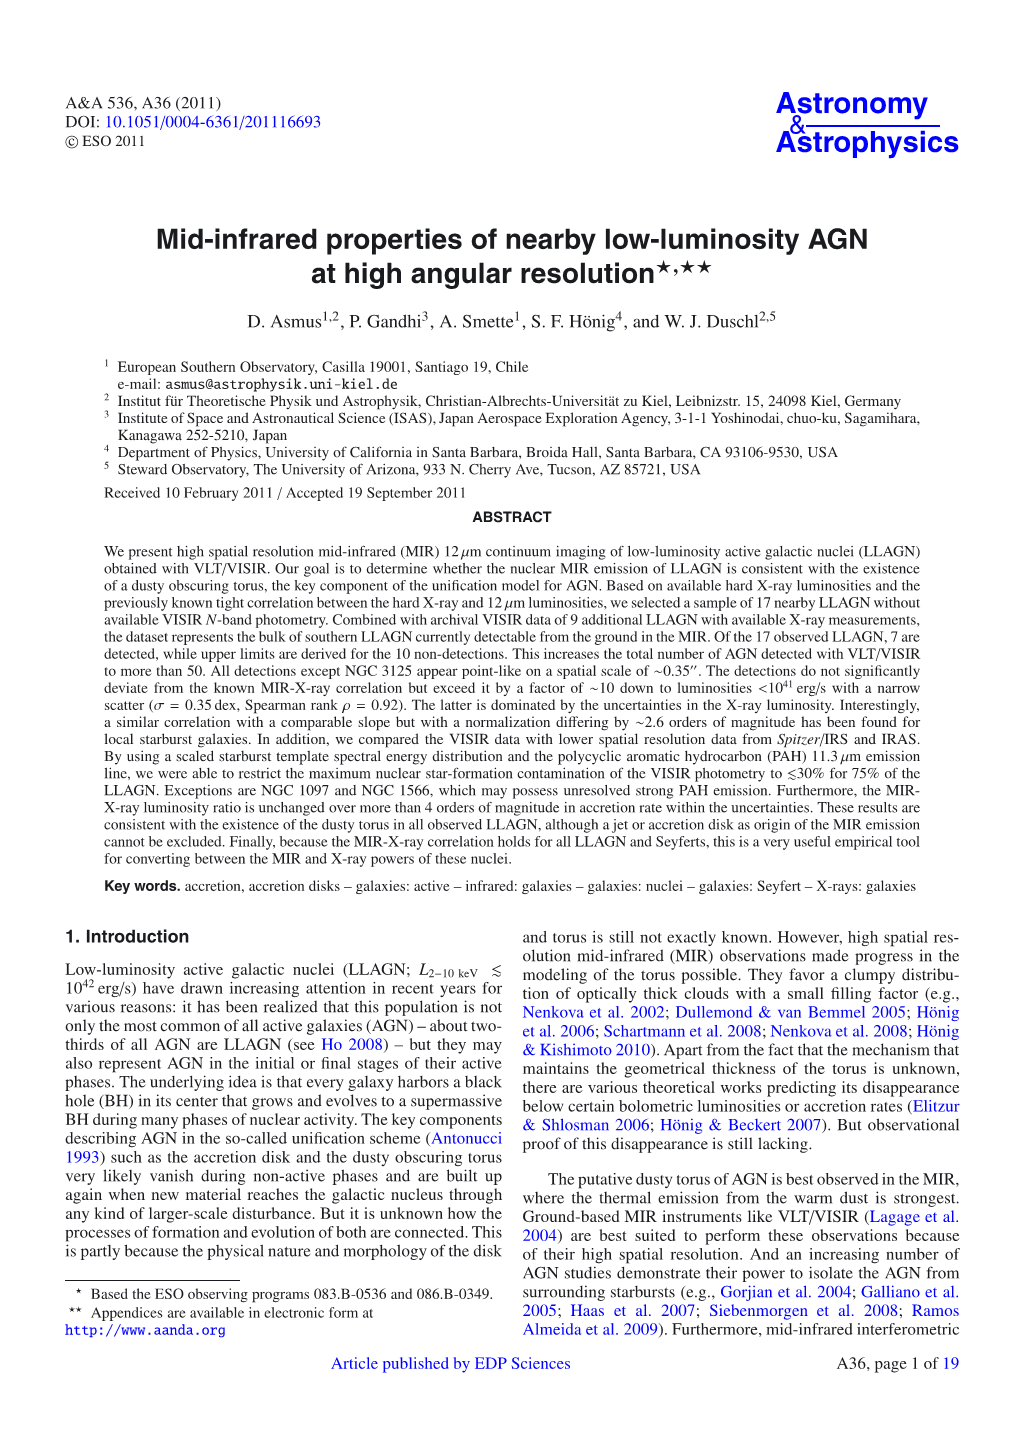 Mid-Infrared Properties of Nearby Low-Luminosity AGN at High Angular Resolution�,